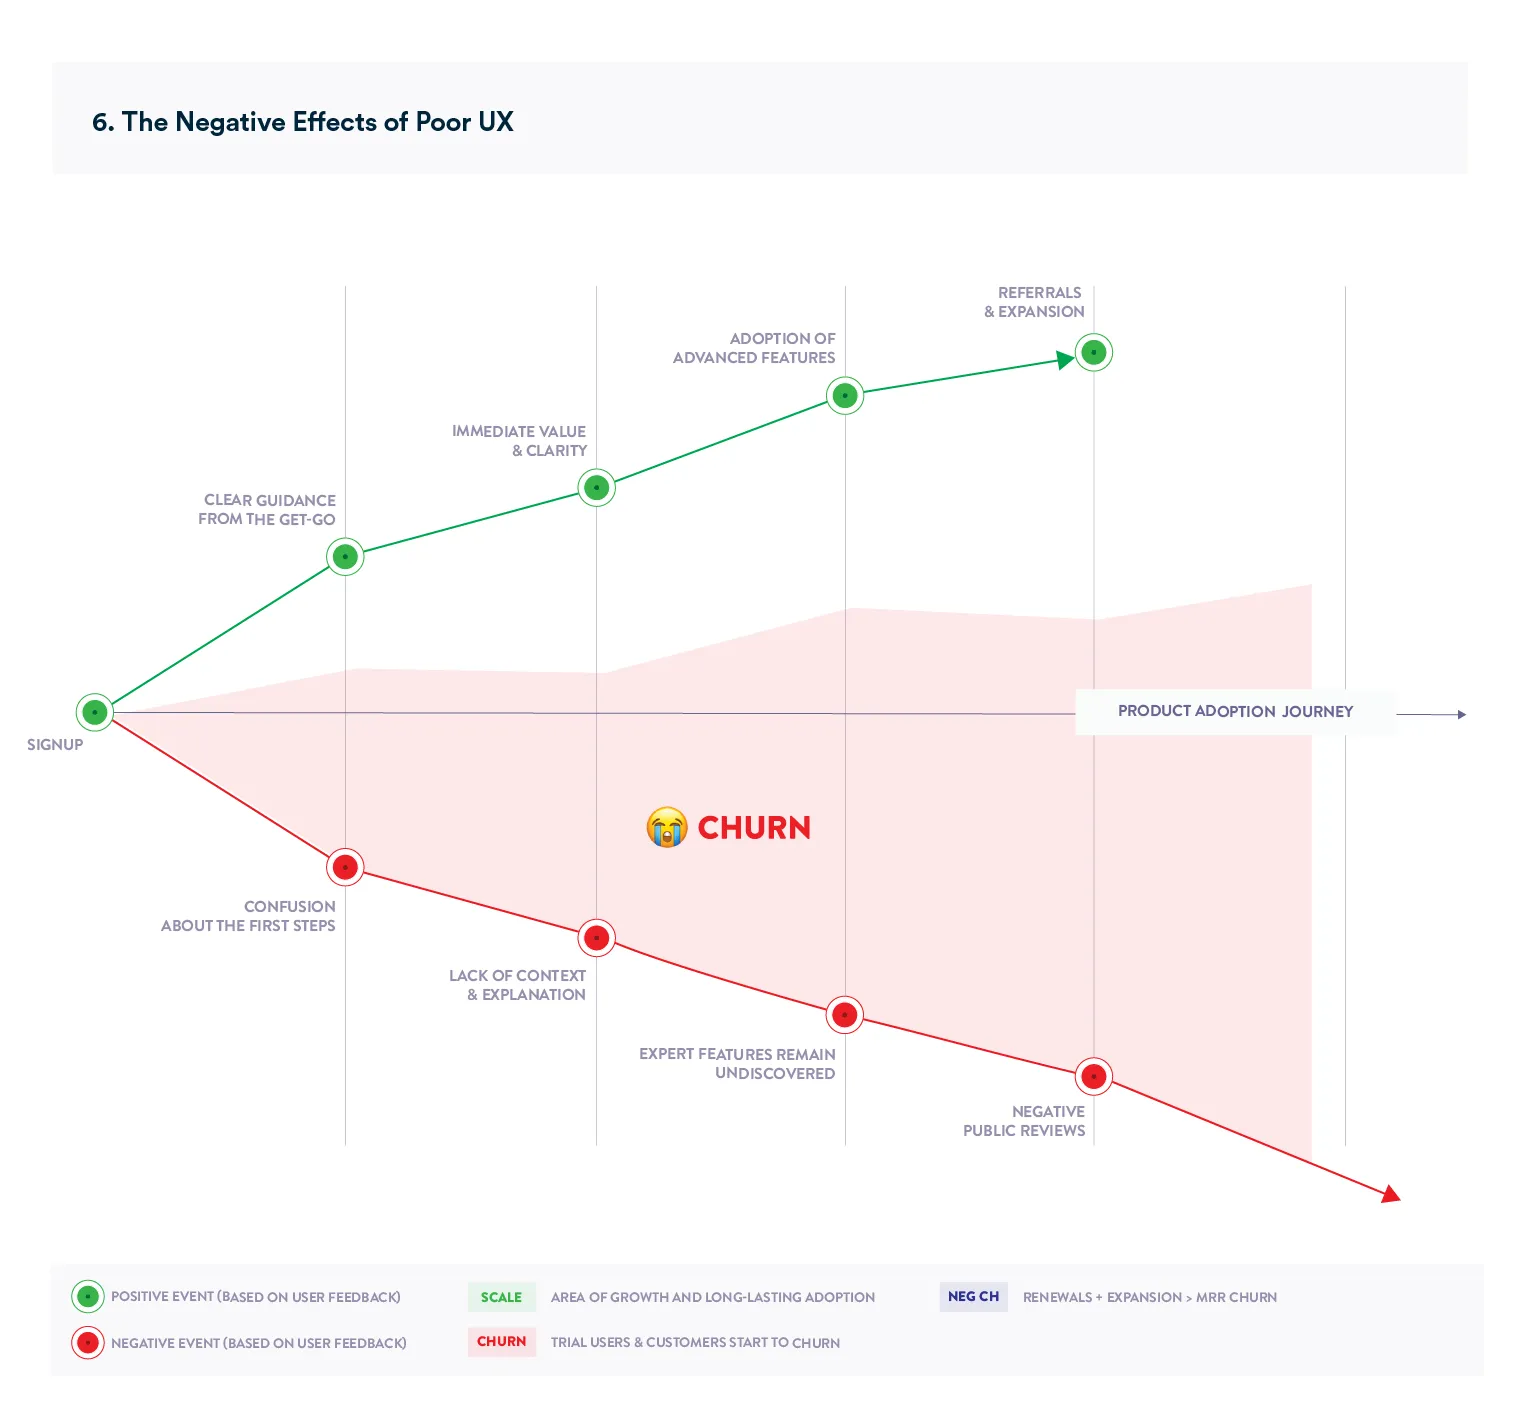 Chart depicting the negative effects of poor user experience on product adoption